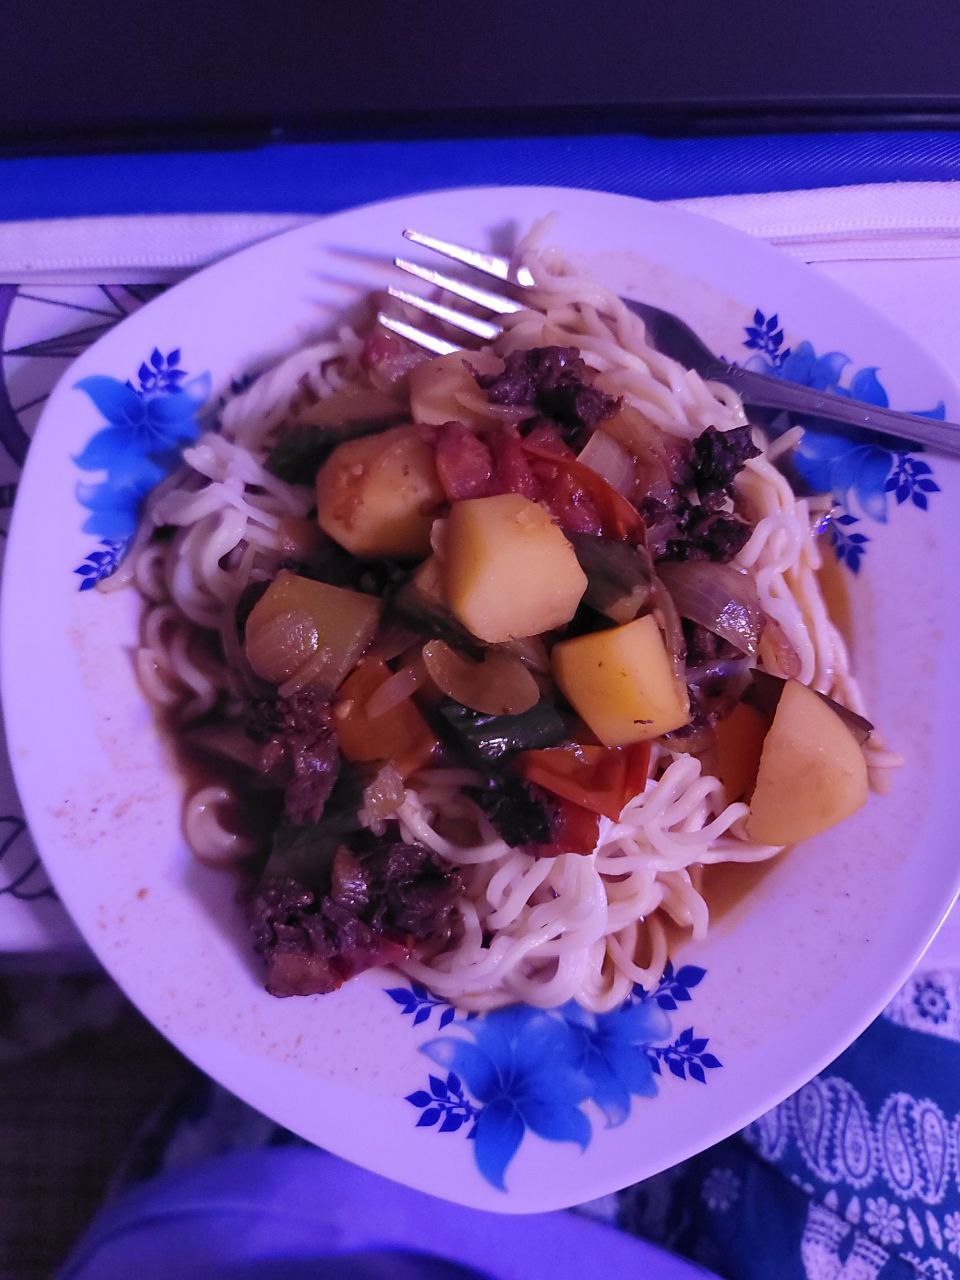 noodles with fried meat and vegetables including cucumber, tomato, potato and onion with a little bit of broth/oil